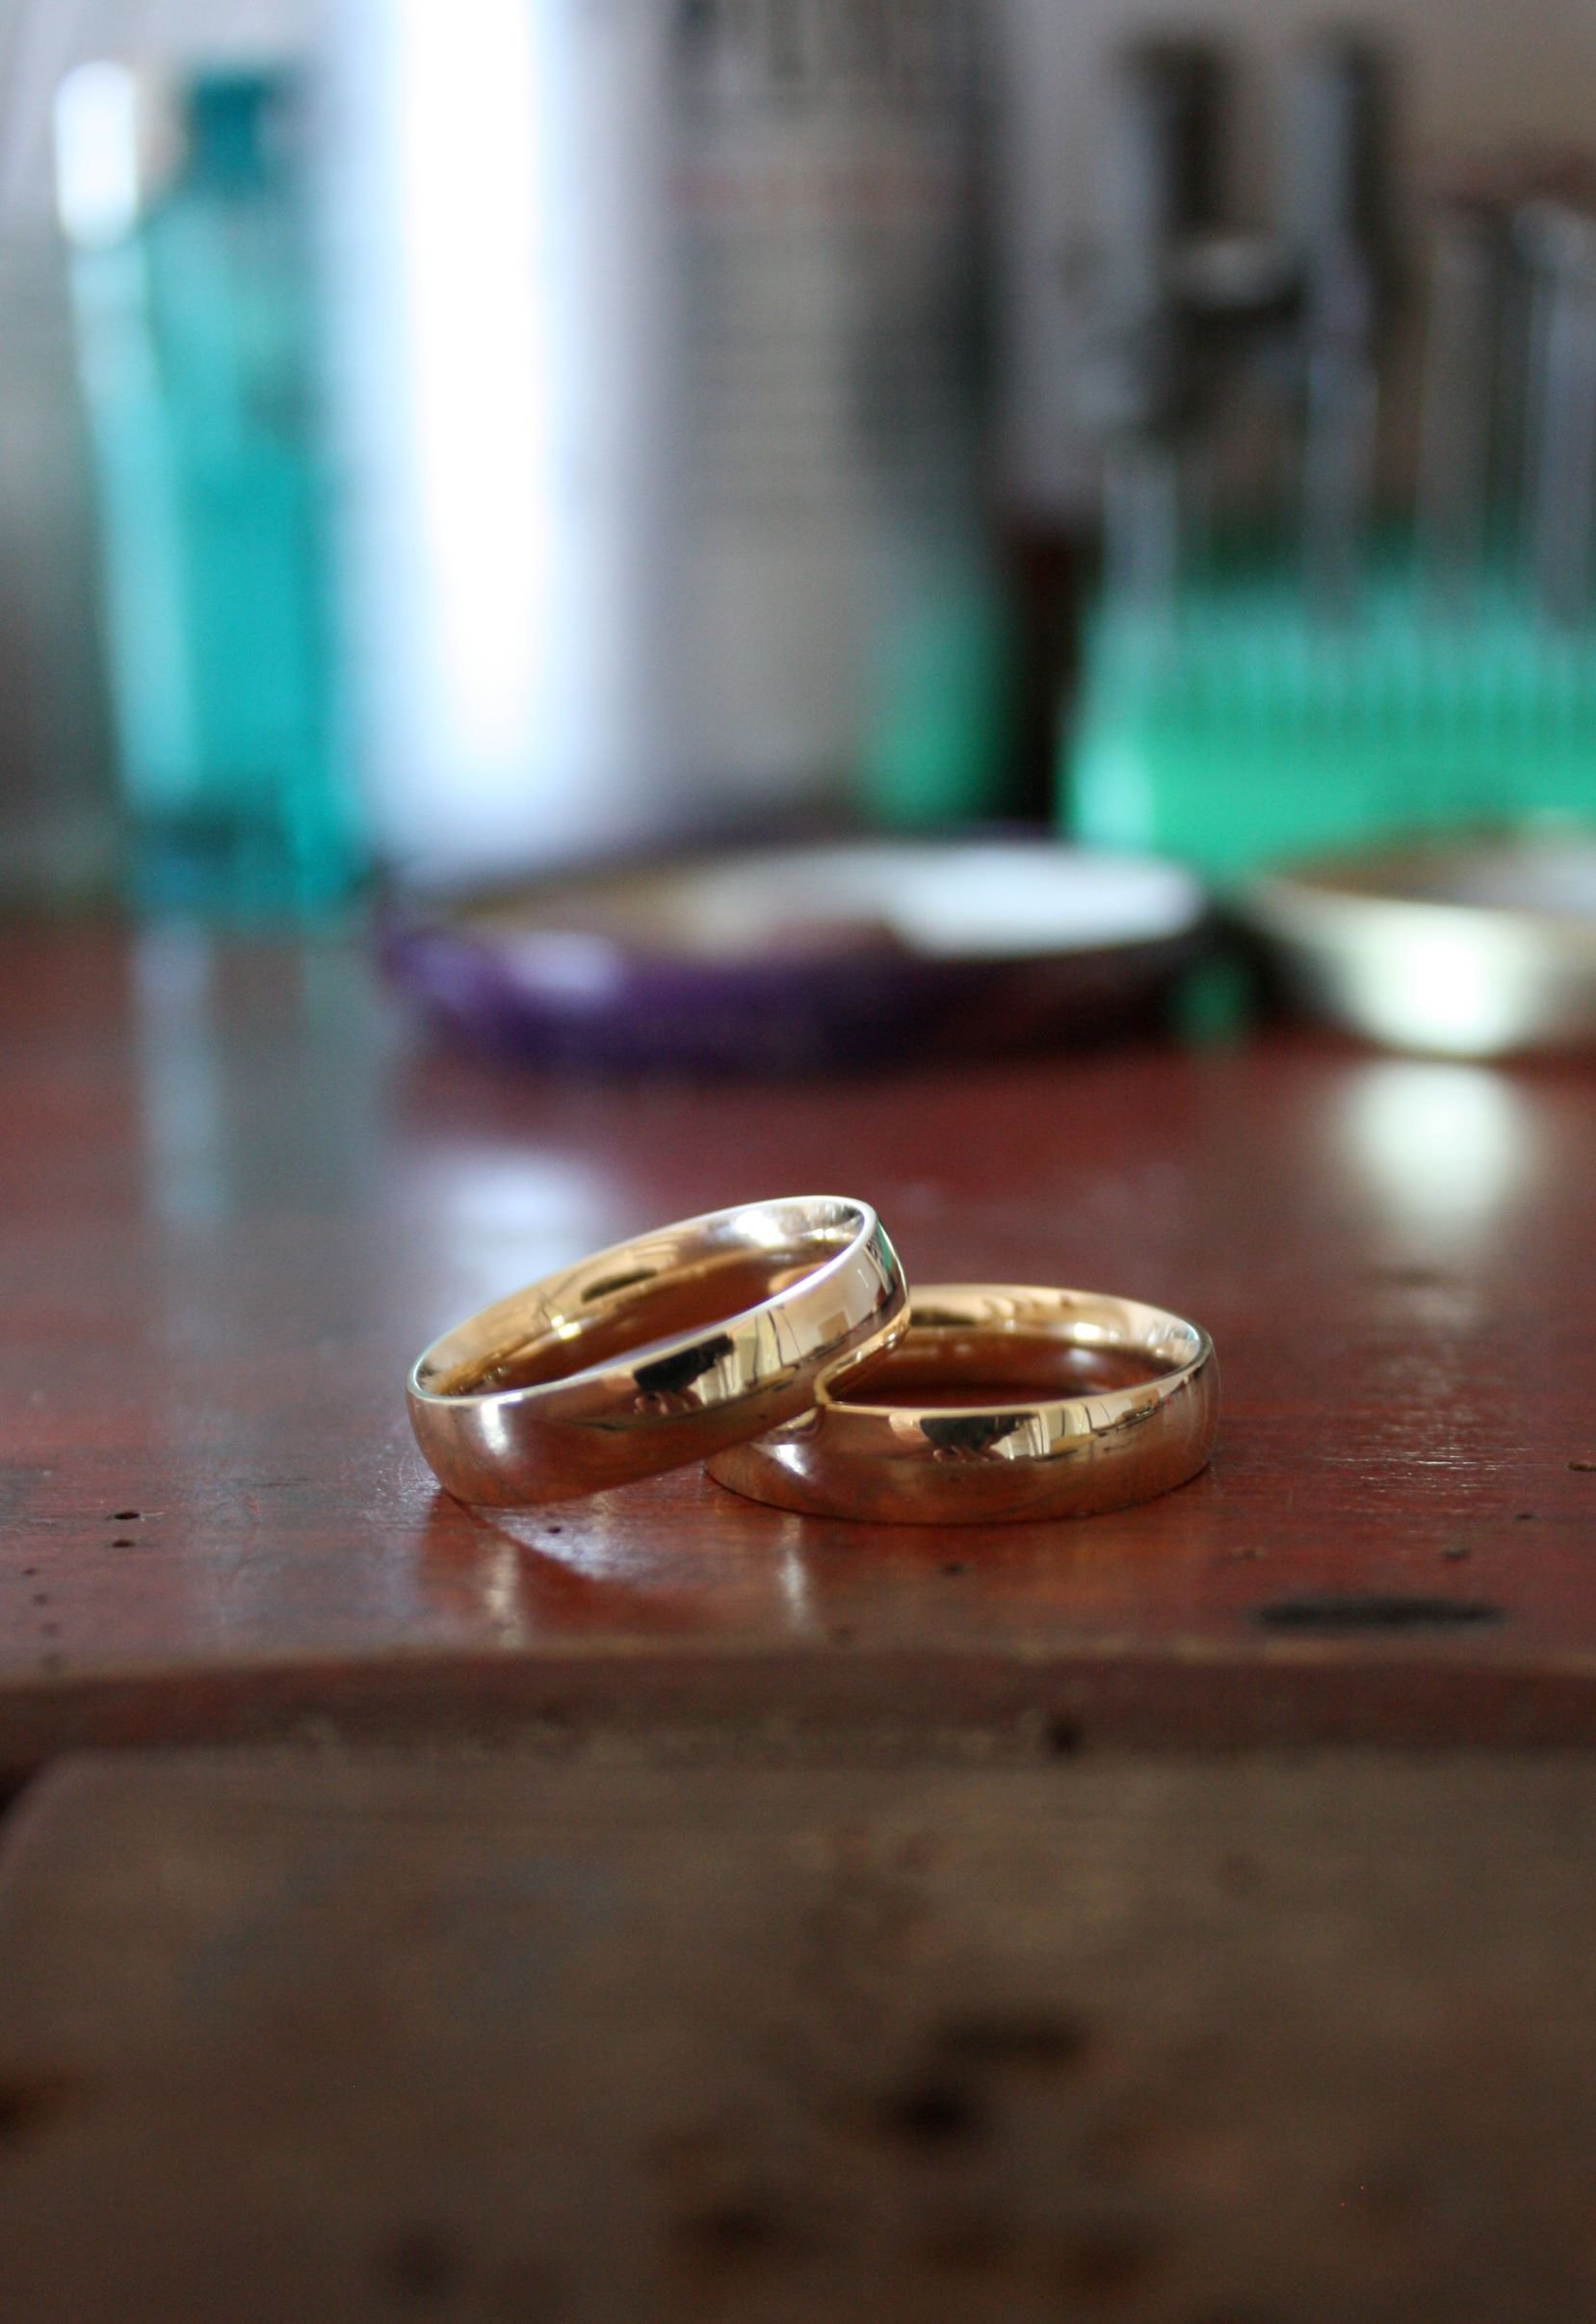 18ct Fairmined gold wedding rings